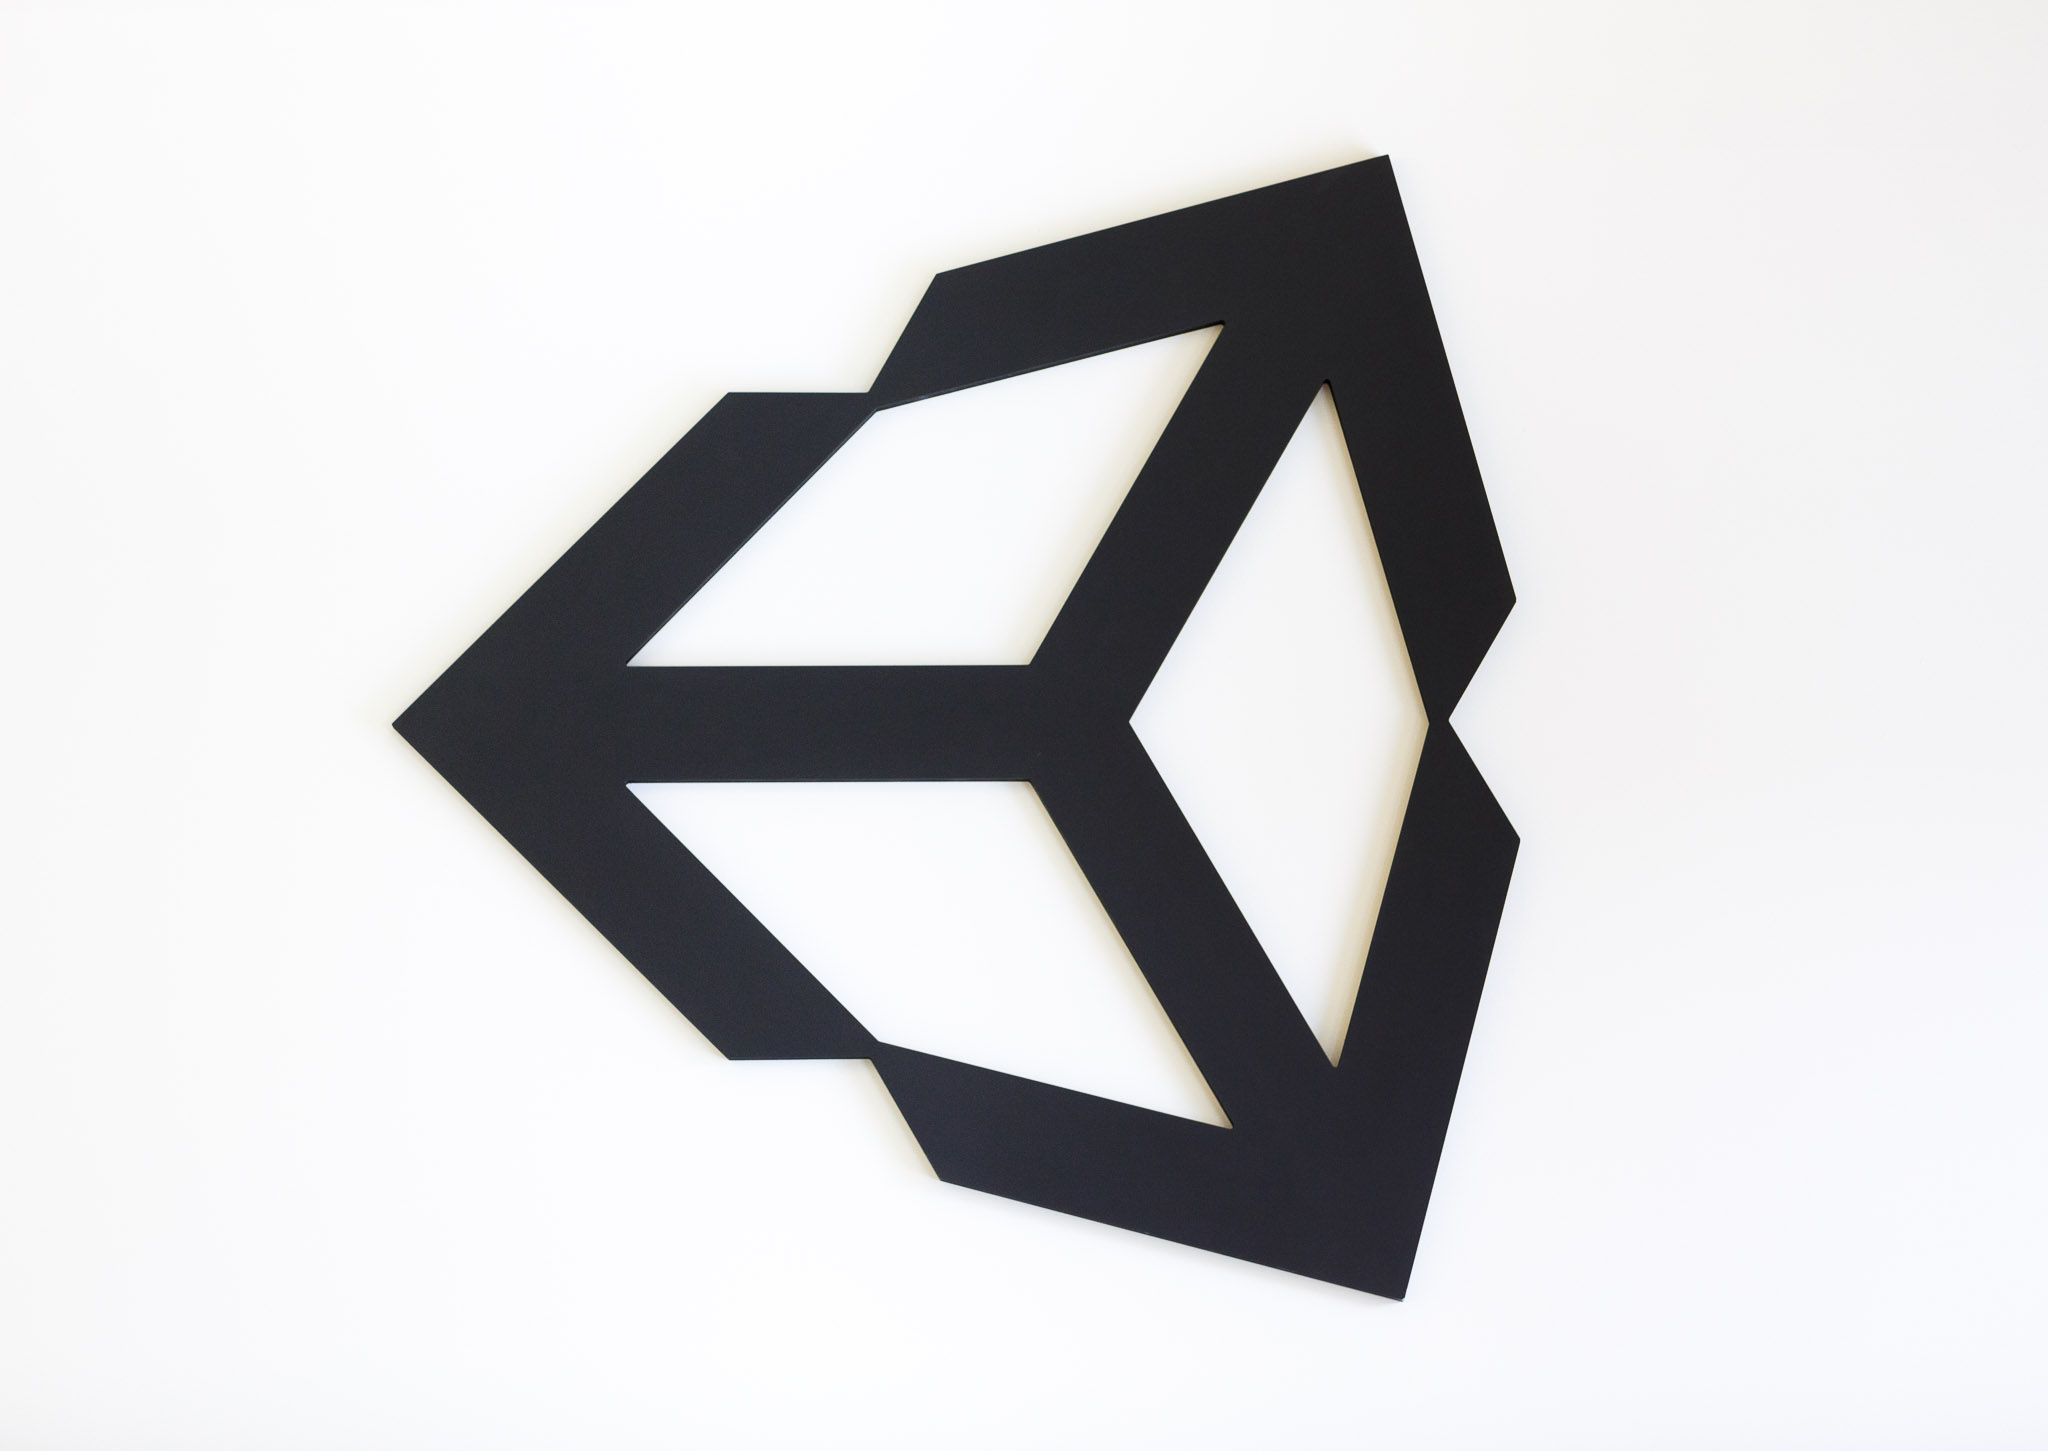 Unity's logo appears as giant wall art at the company's San Francisco office.